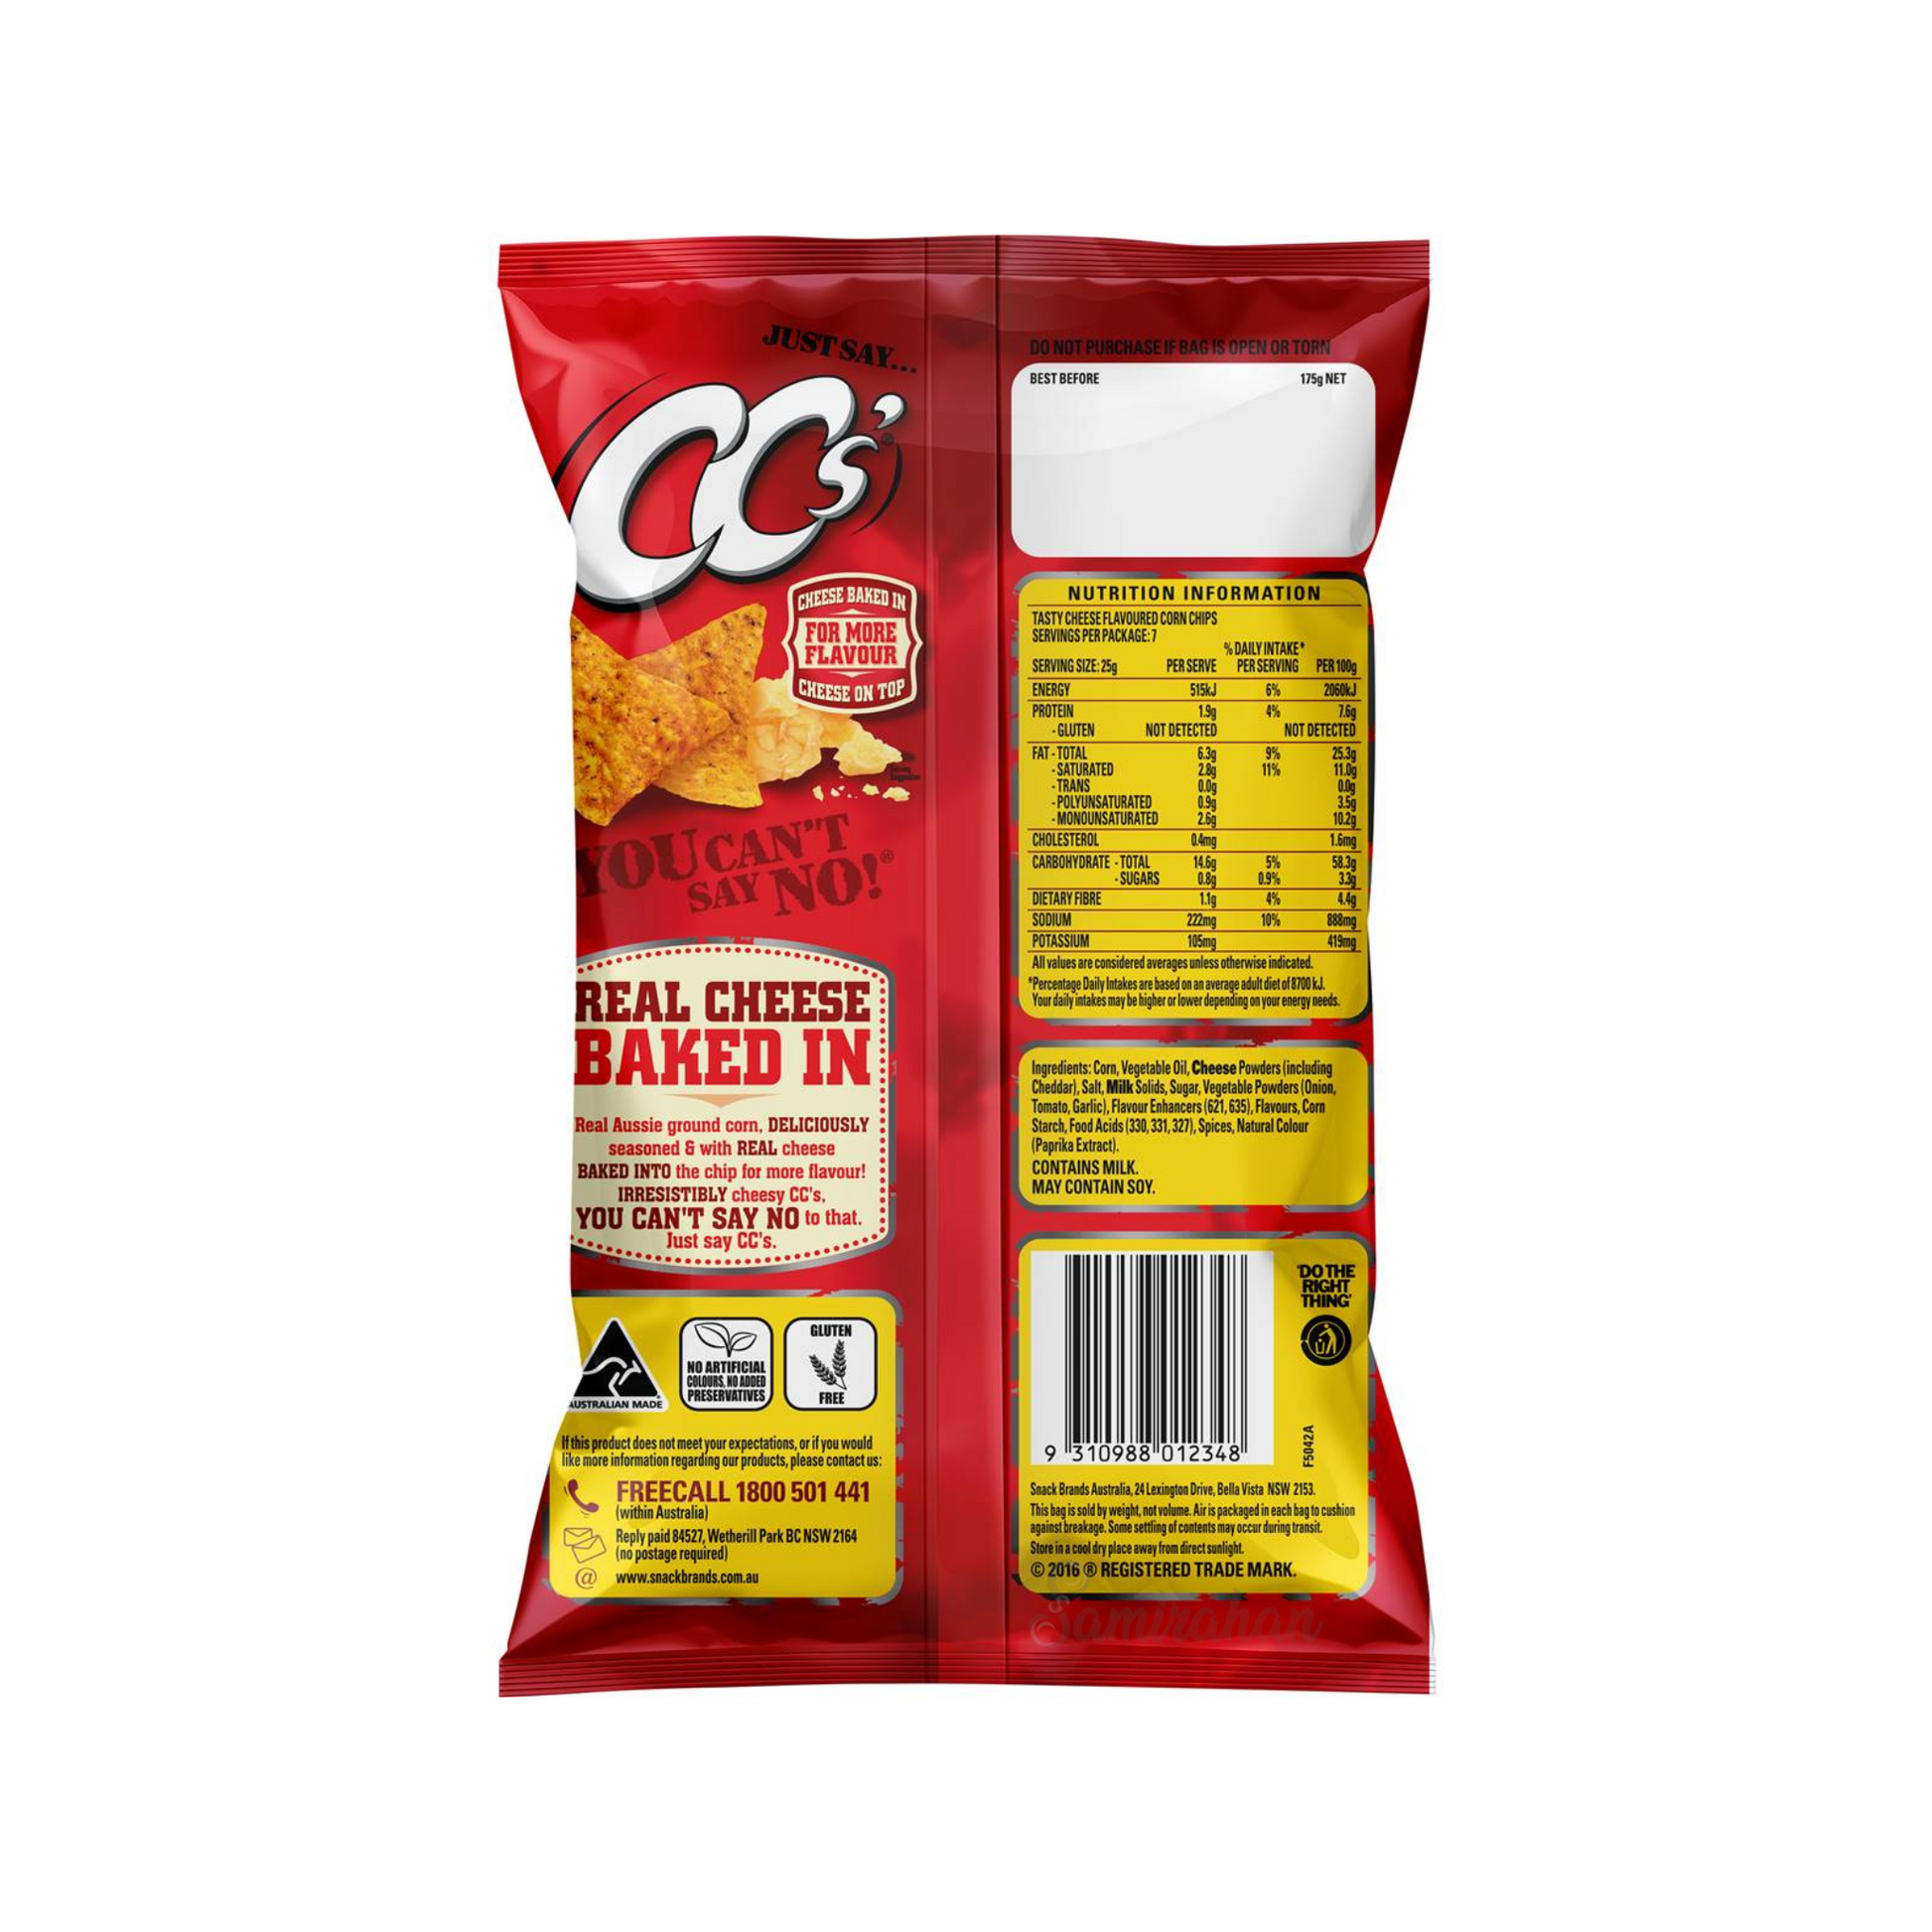 CC's Corn Chips Tasty Cheese are Australia's original corn chip - made with real Aussie ground corn, topped with a tasty cheese seasoning & with real cheese baked in. No artificial colours or preservatives. Halal suitable. Gluten free. Best genuine foreign Aussie delicious healthy snacks nachos in Dhaka Bangladesh.